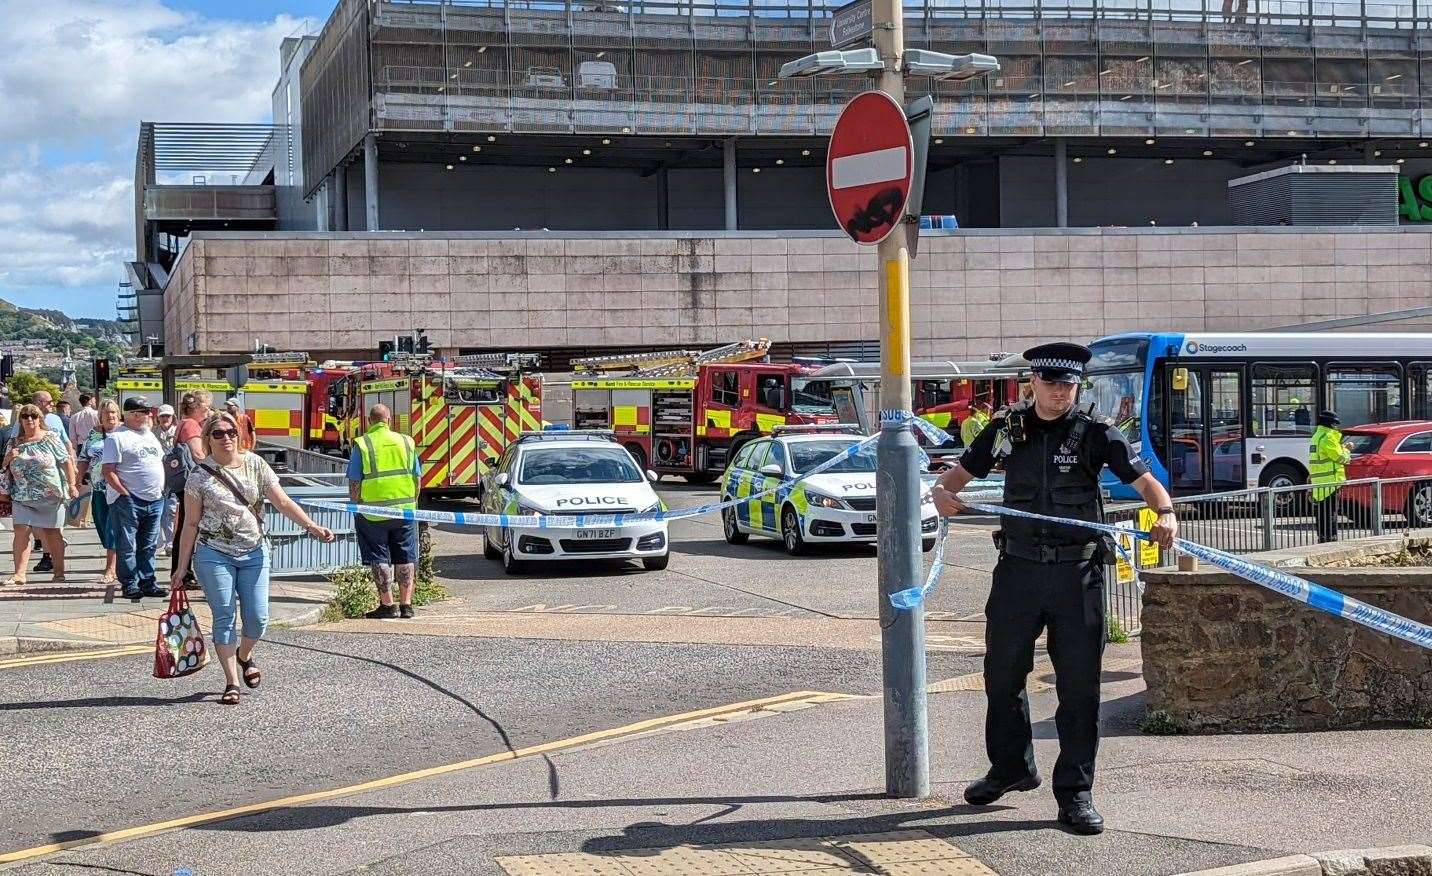 Folkestone bus station was awash with emergency service vehicles after the accident